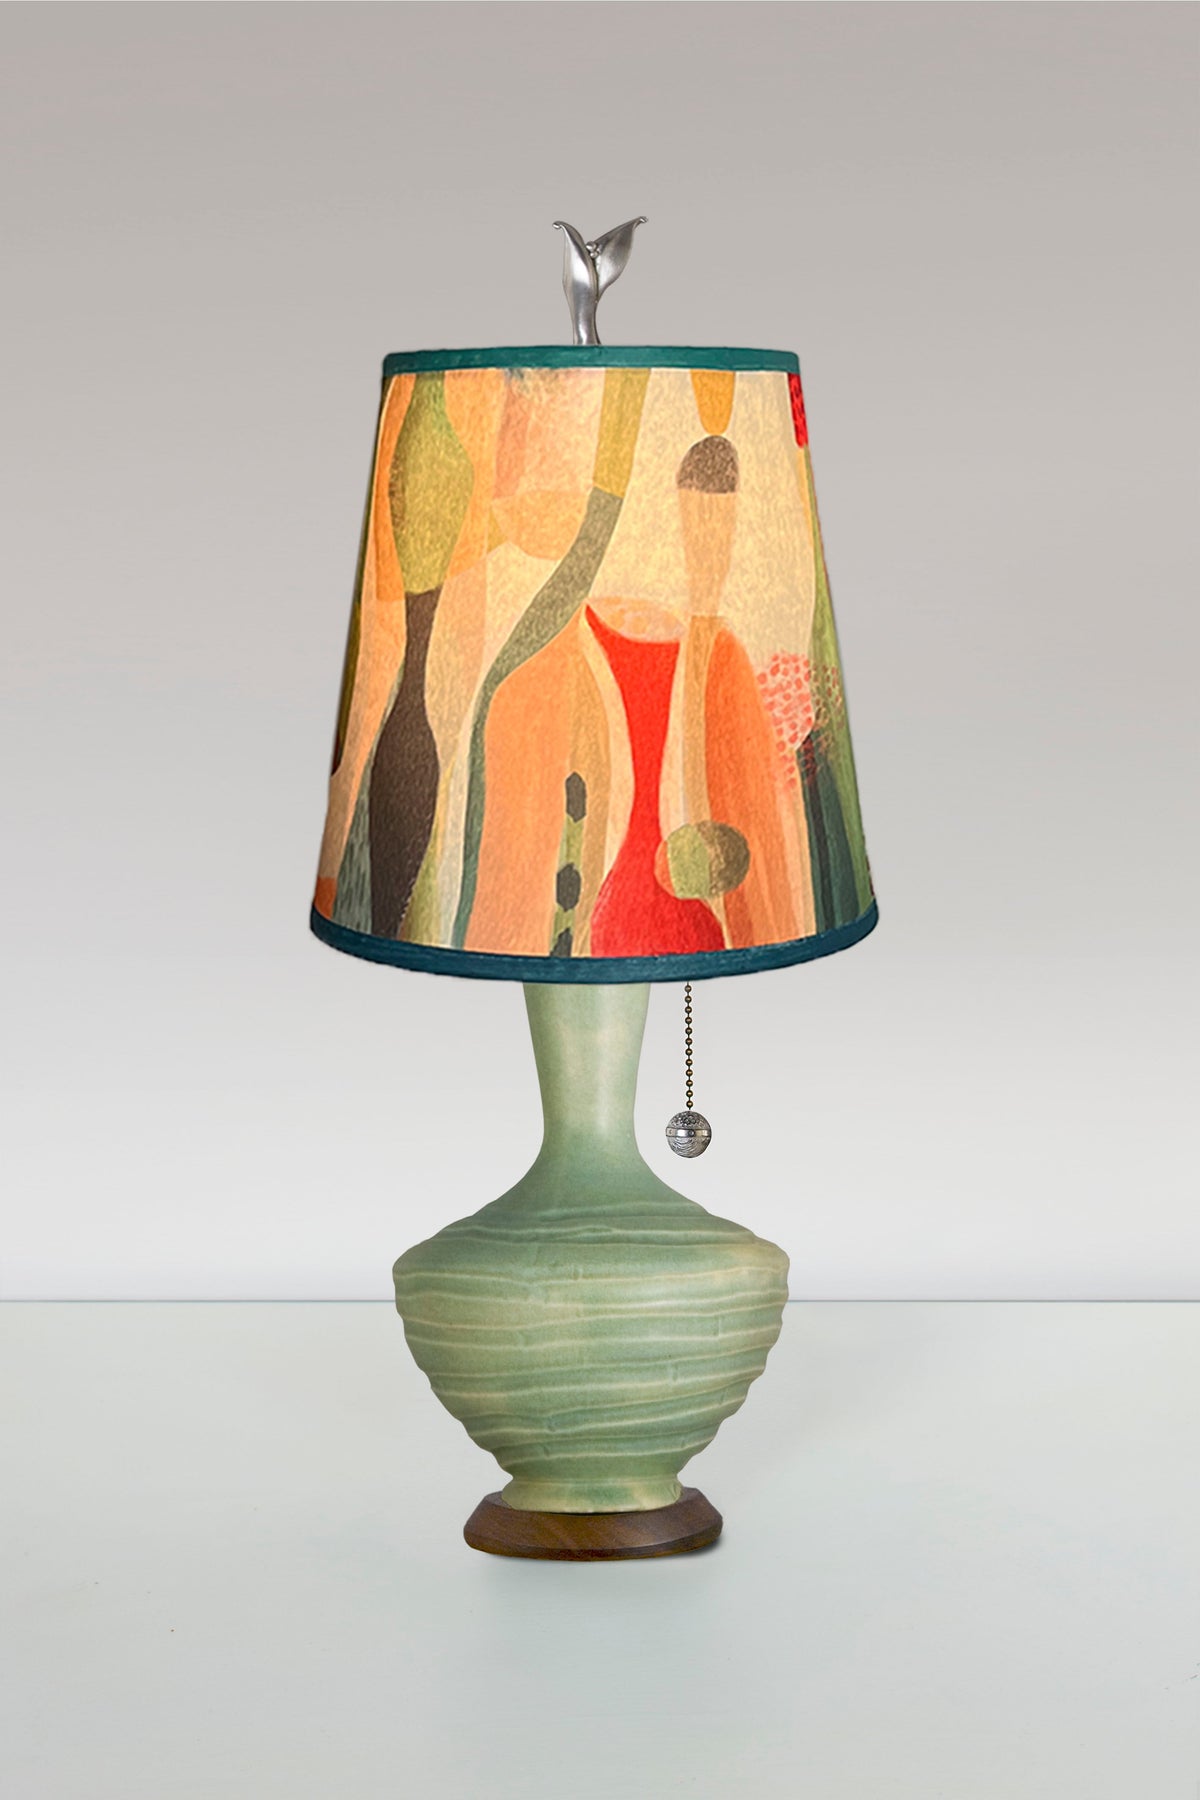 Janna Ugone &amp; Co Table Lamp Ceramic Table Lamp in Old Copper with Small Drum Shade in Riviera in Poppy